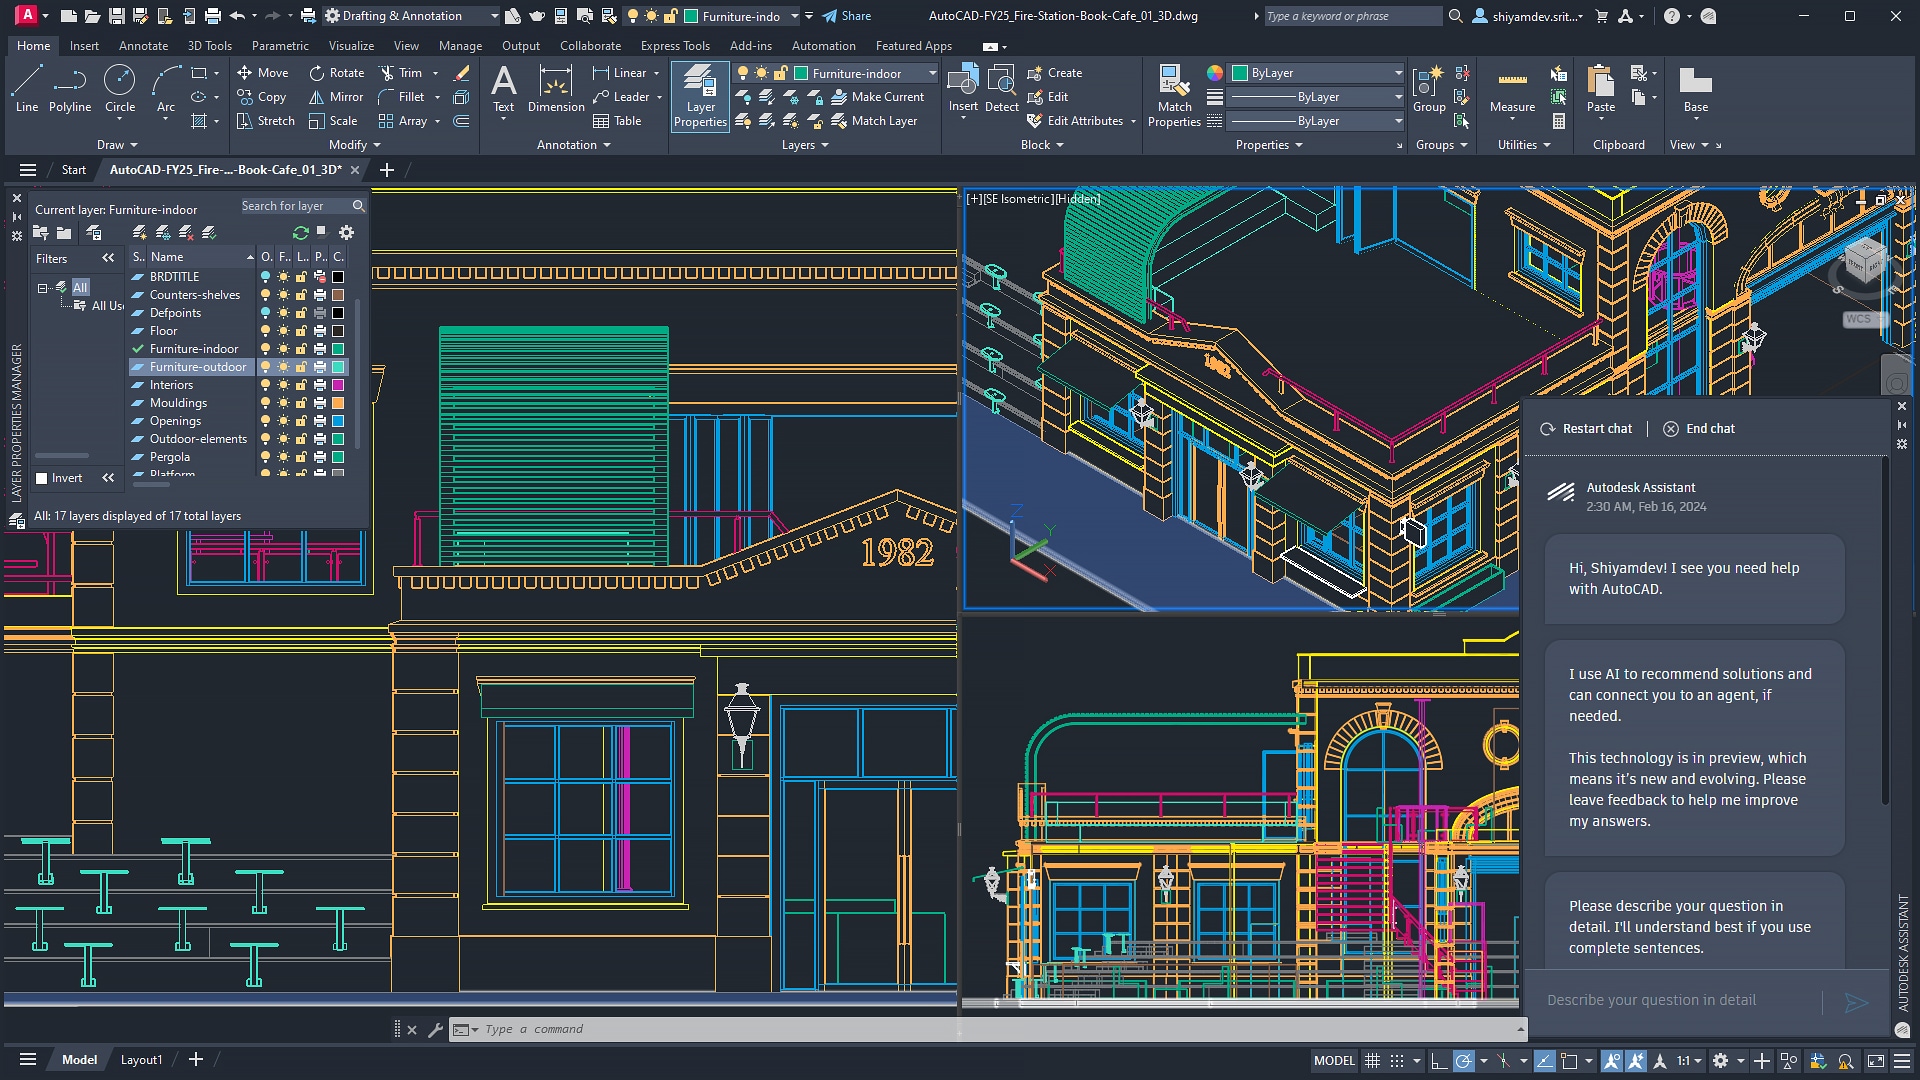 Exterior wireframe of old fire station build layout modeled in 2D and 3D in AutoCAD with Autodesk Assistant chat open